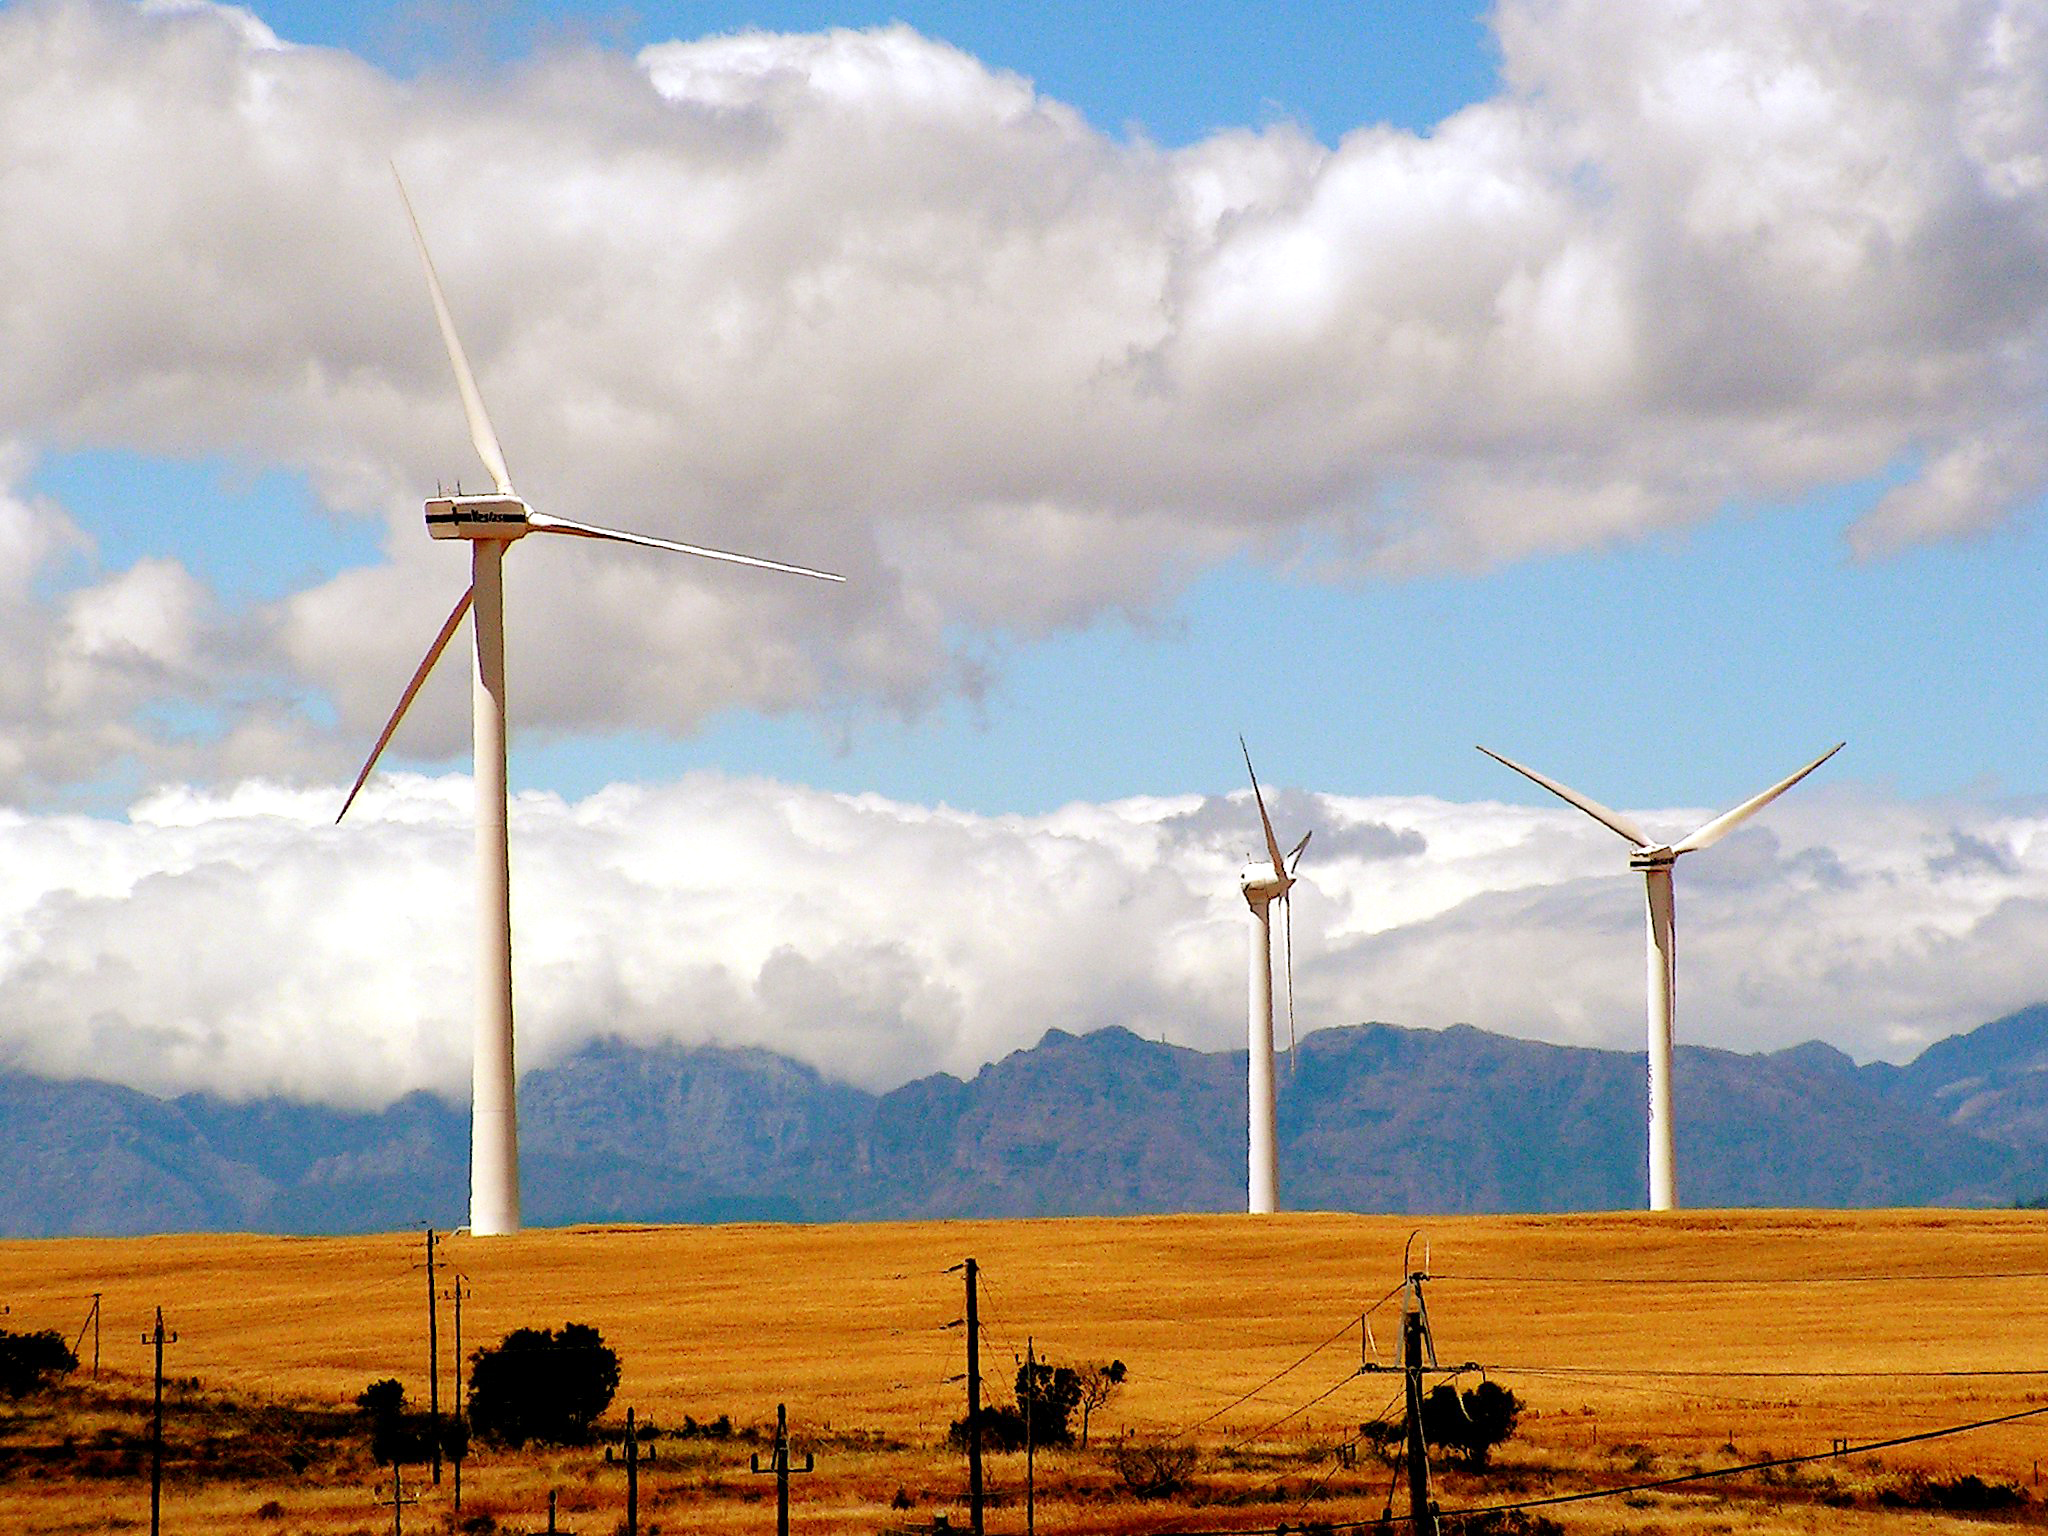 Wind turbines in South Africa